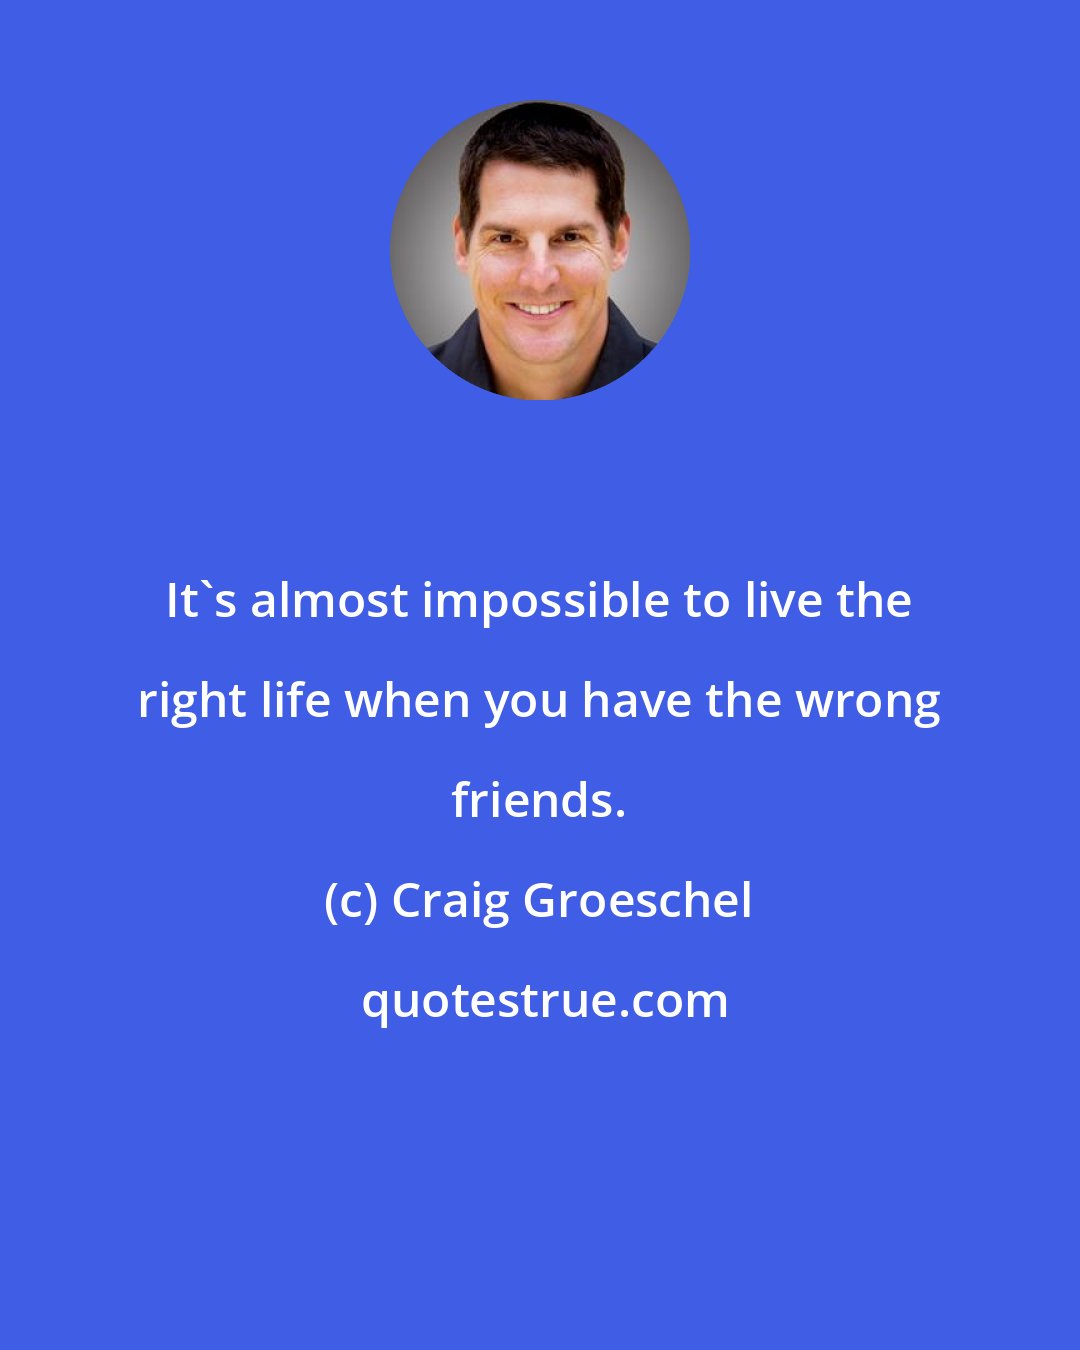 Craig Groeschel: It's almost impossible to live the right life when you have the wrong friends.